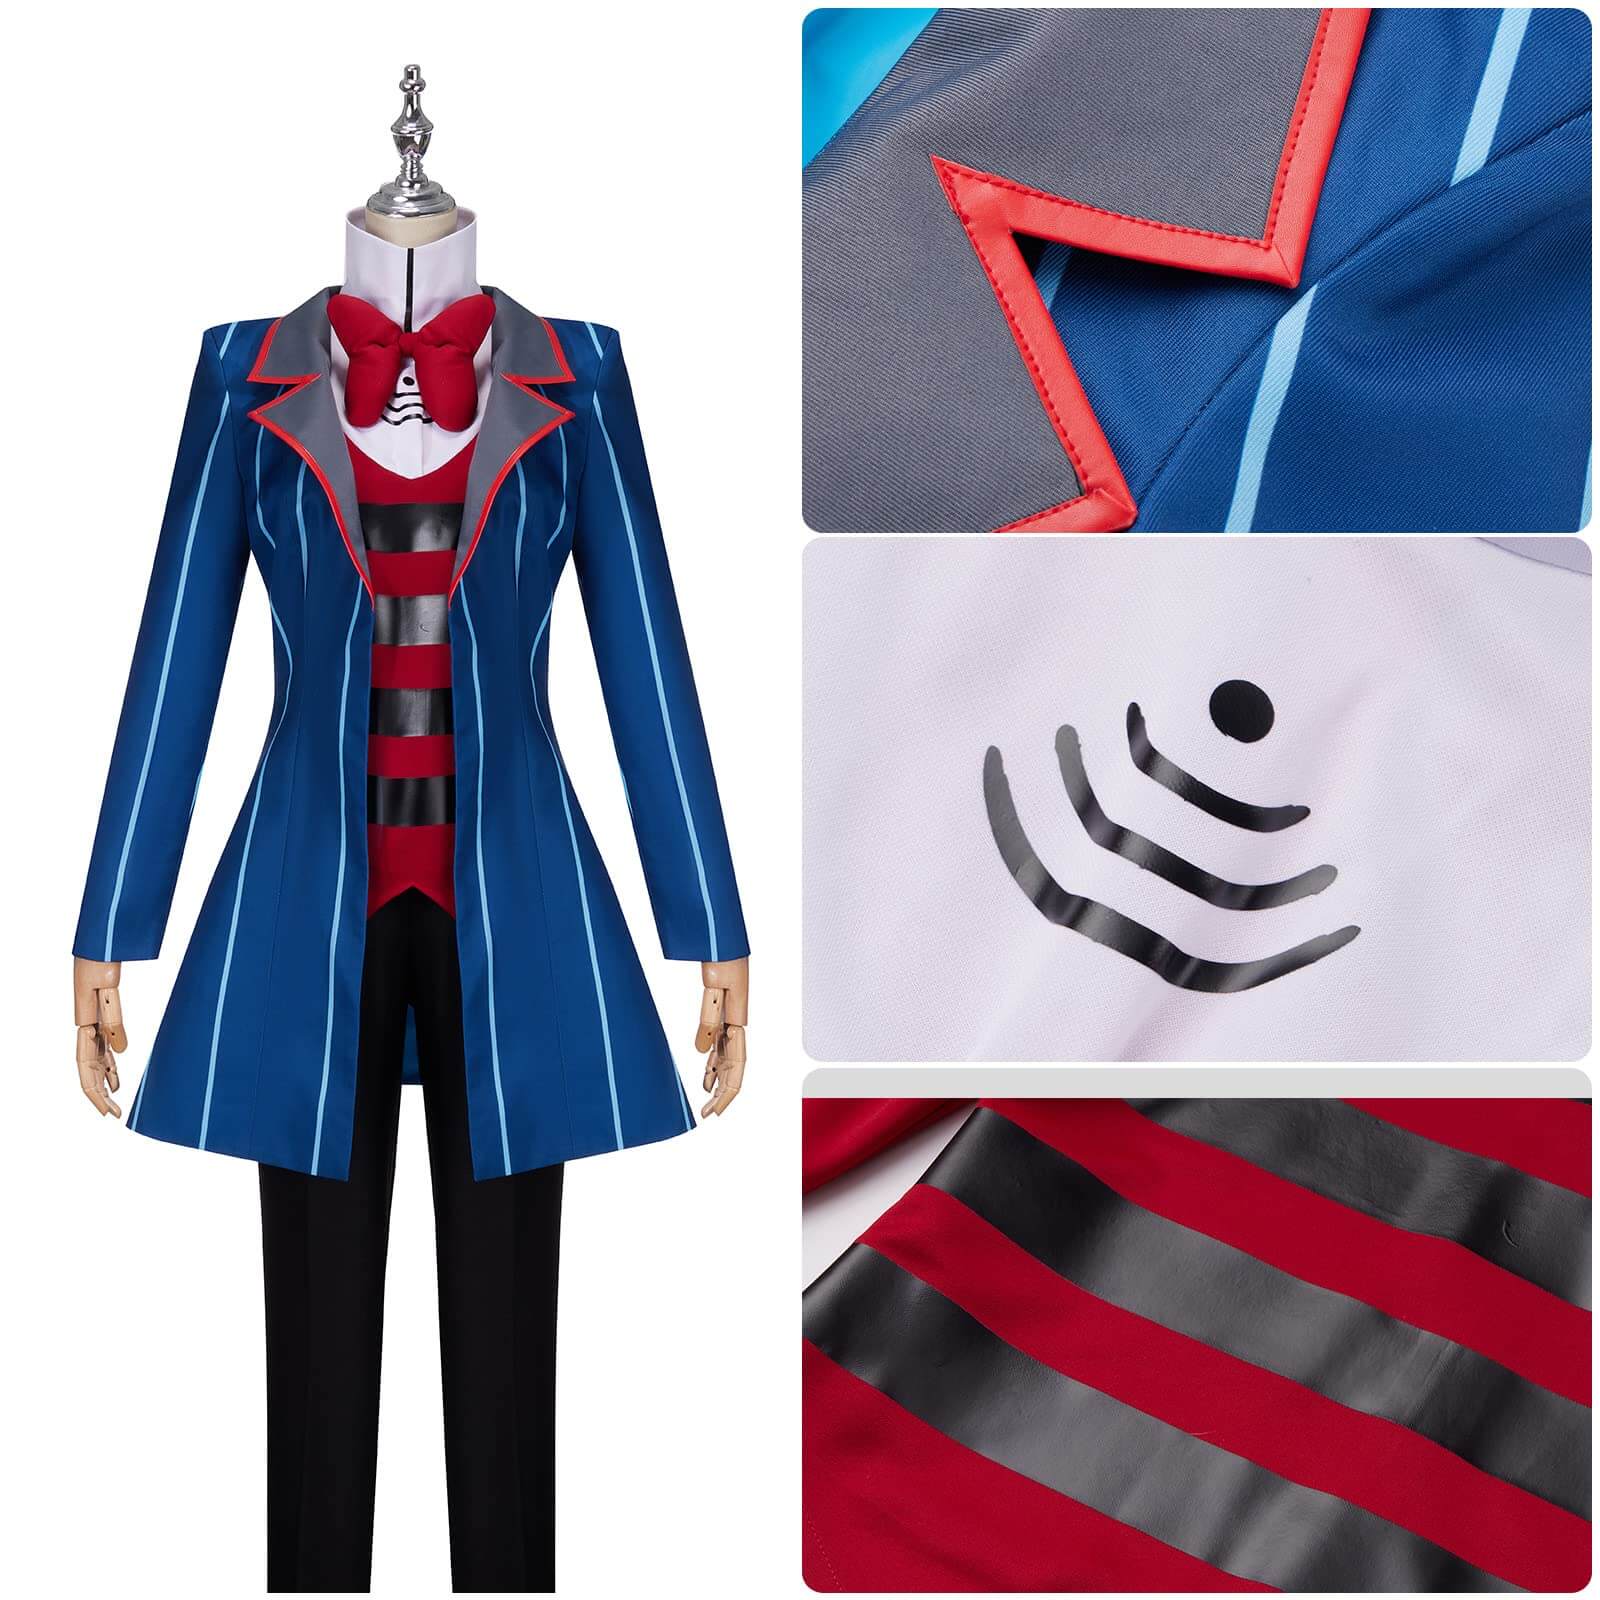 Adult Vox Hazbin Hotel Costume TV Demon Vox Cosplay Outfit Coat Pants and Accessories Full Set for Halloween